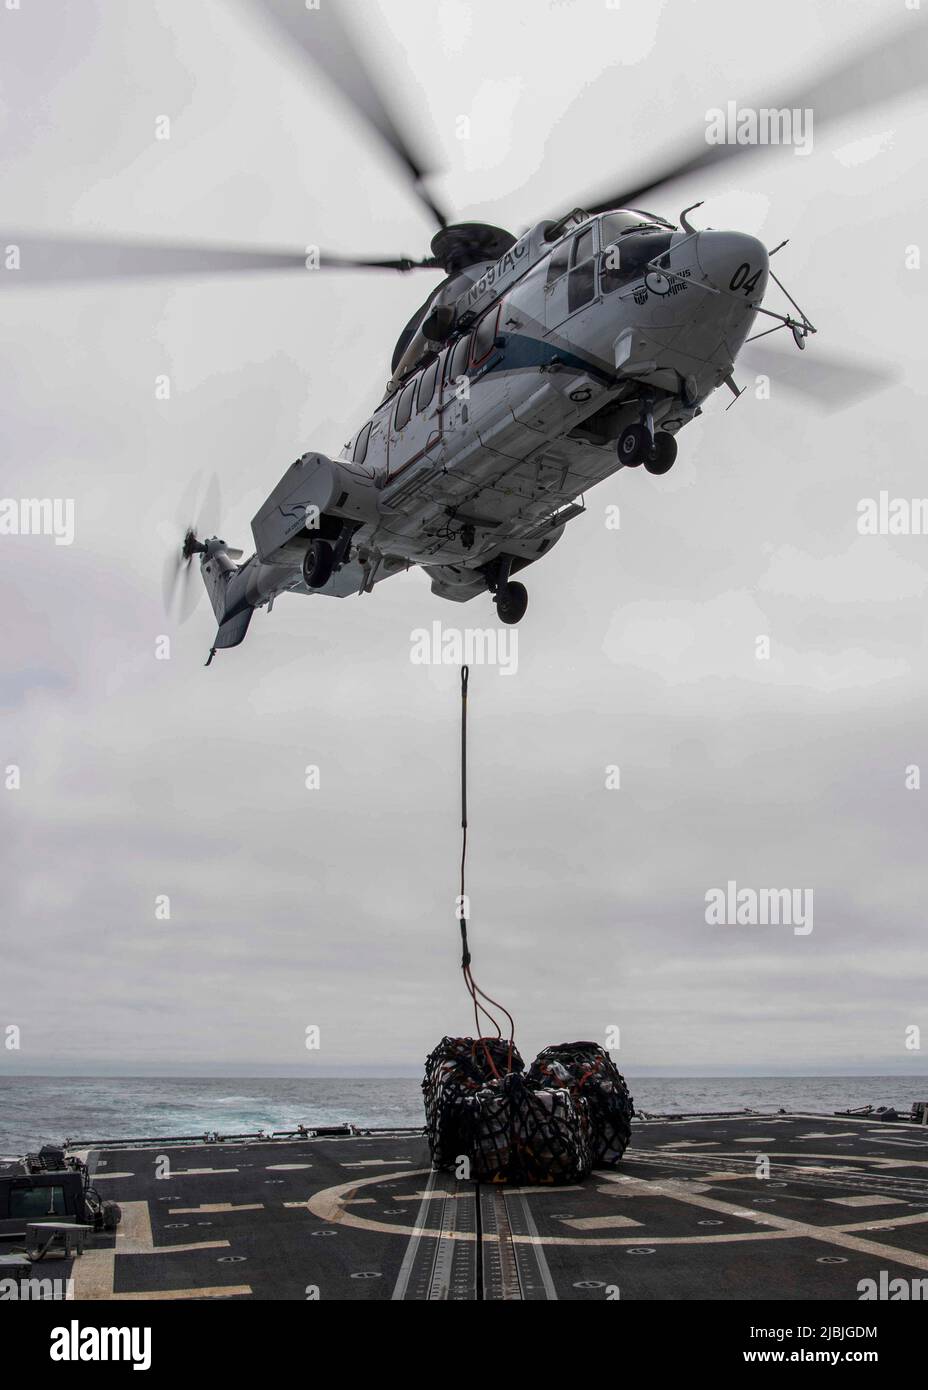 PACIFIC OCEAN (June 3, 2022) An AS 332 Super Puma helicopter assigned to  Lewis and Clark-class dry cargo ship USNS Richard E. Byrd (T-AKE 4) drops  cargo on the flight deck during